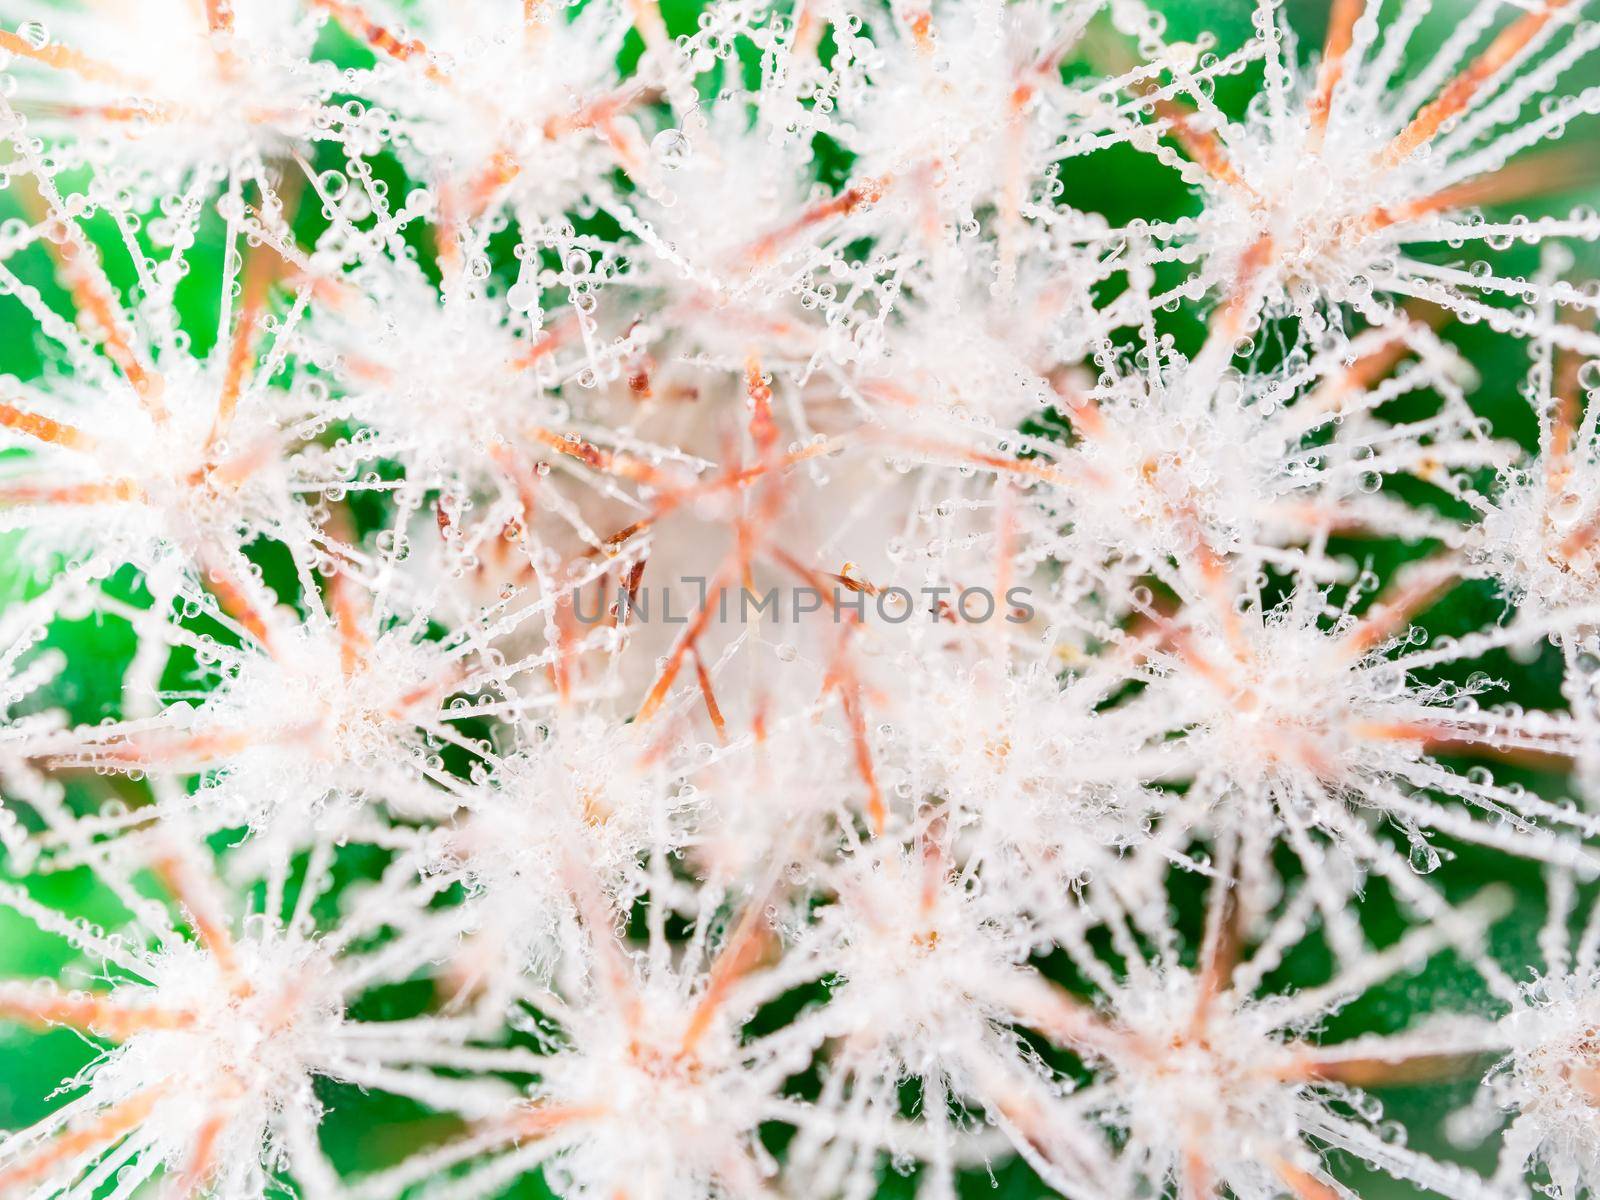 macro image of cactus and with long needles and drops of water or dew, top view.